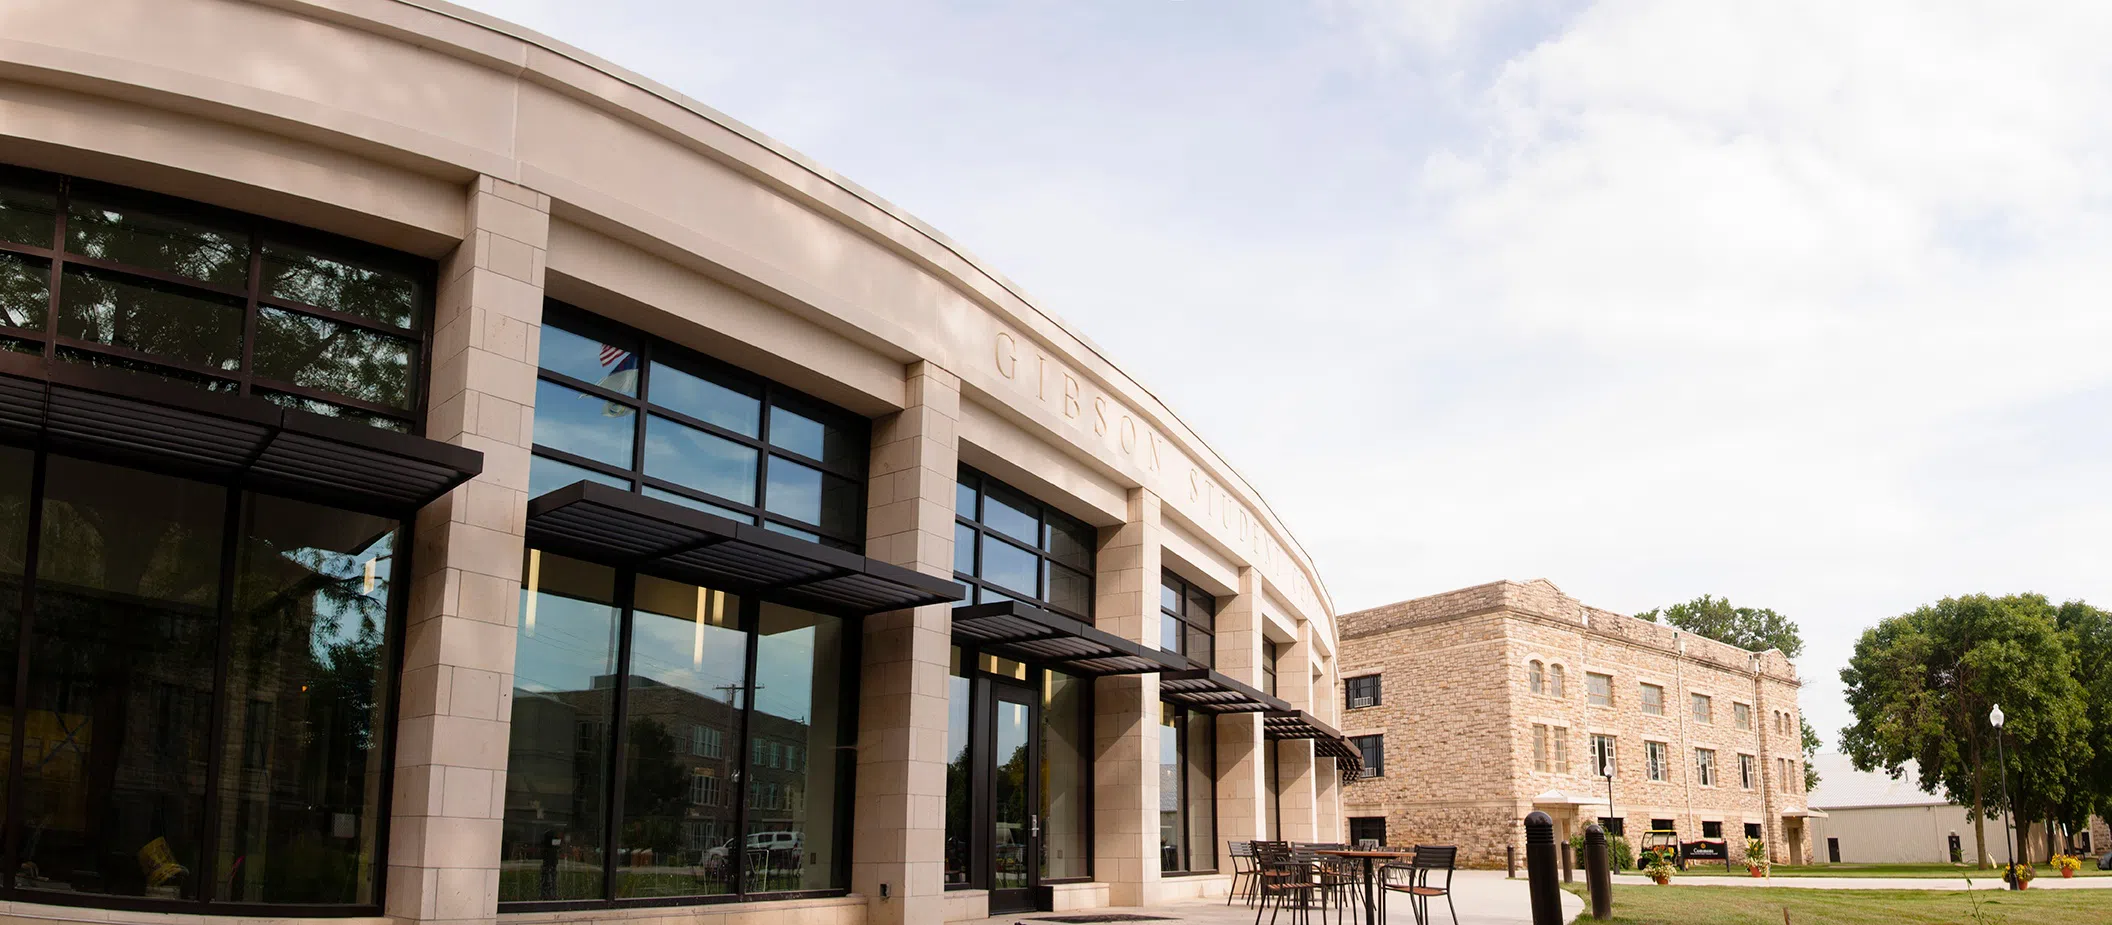 WIthin the walls of the Gibson Student Center, you will find the Hetrick Bistro for all your dining needs.